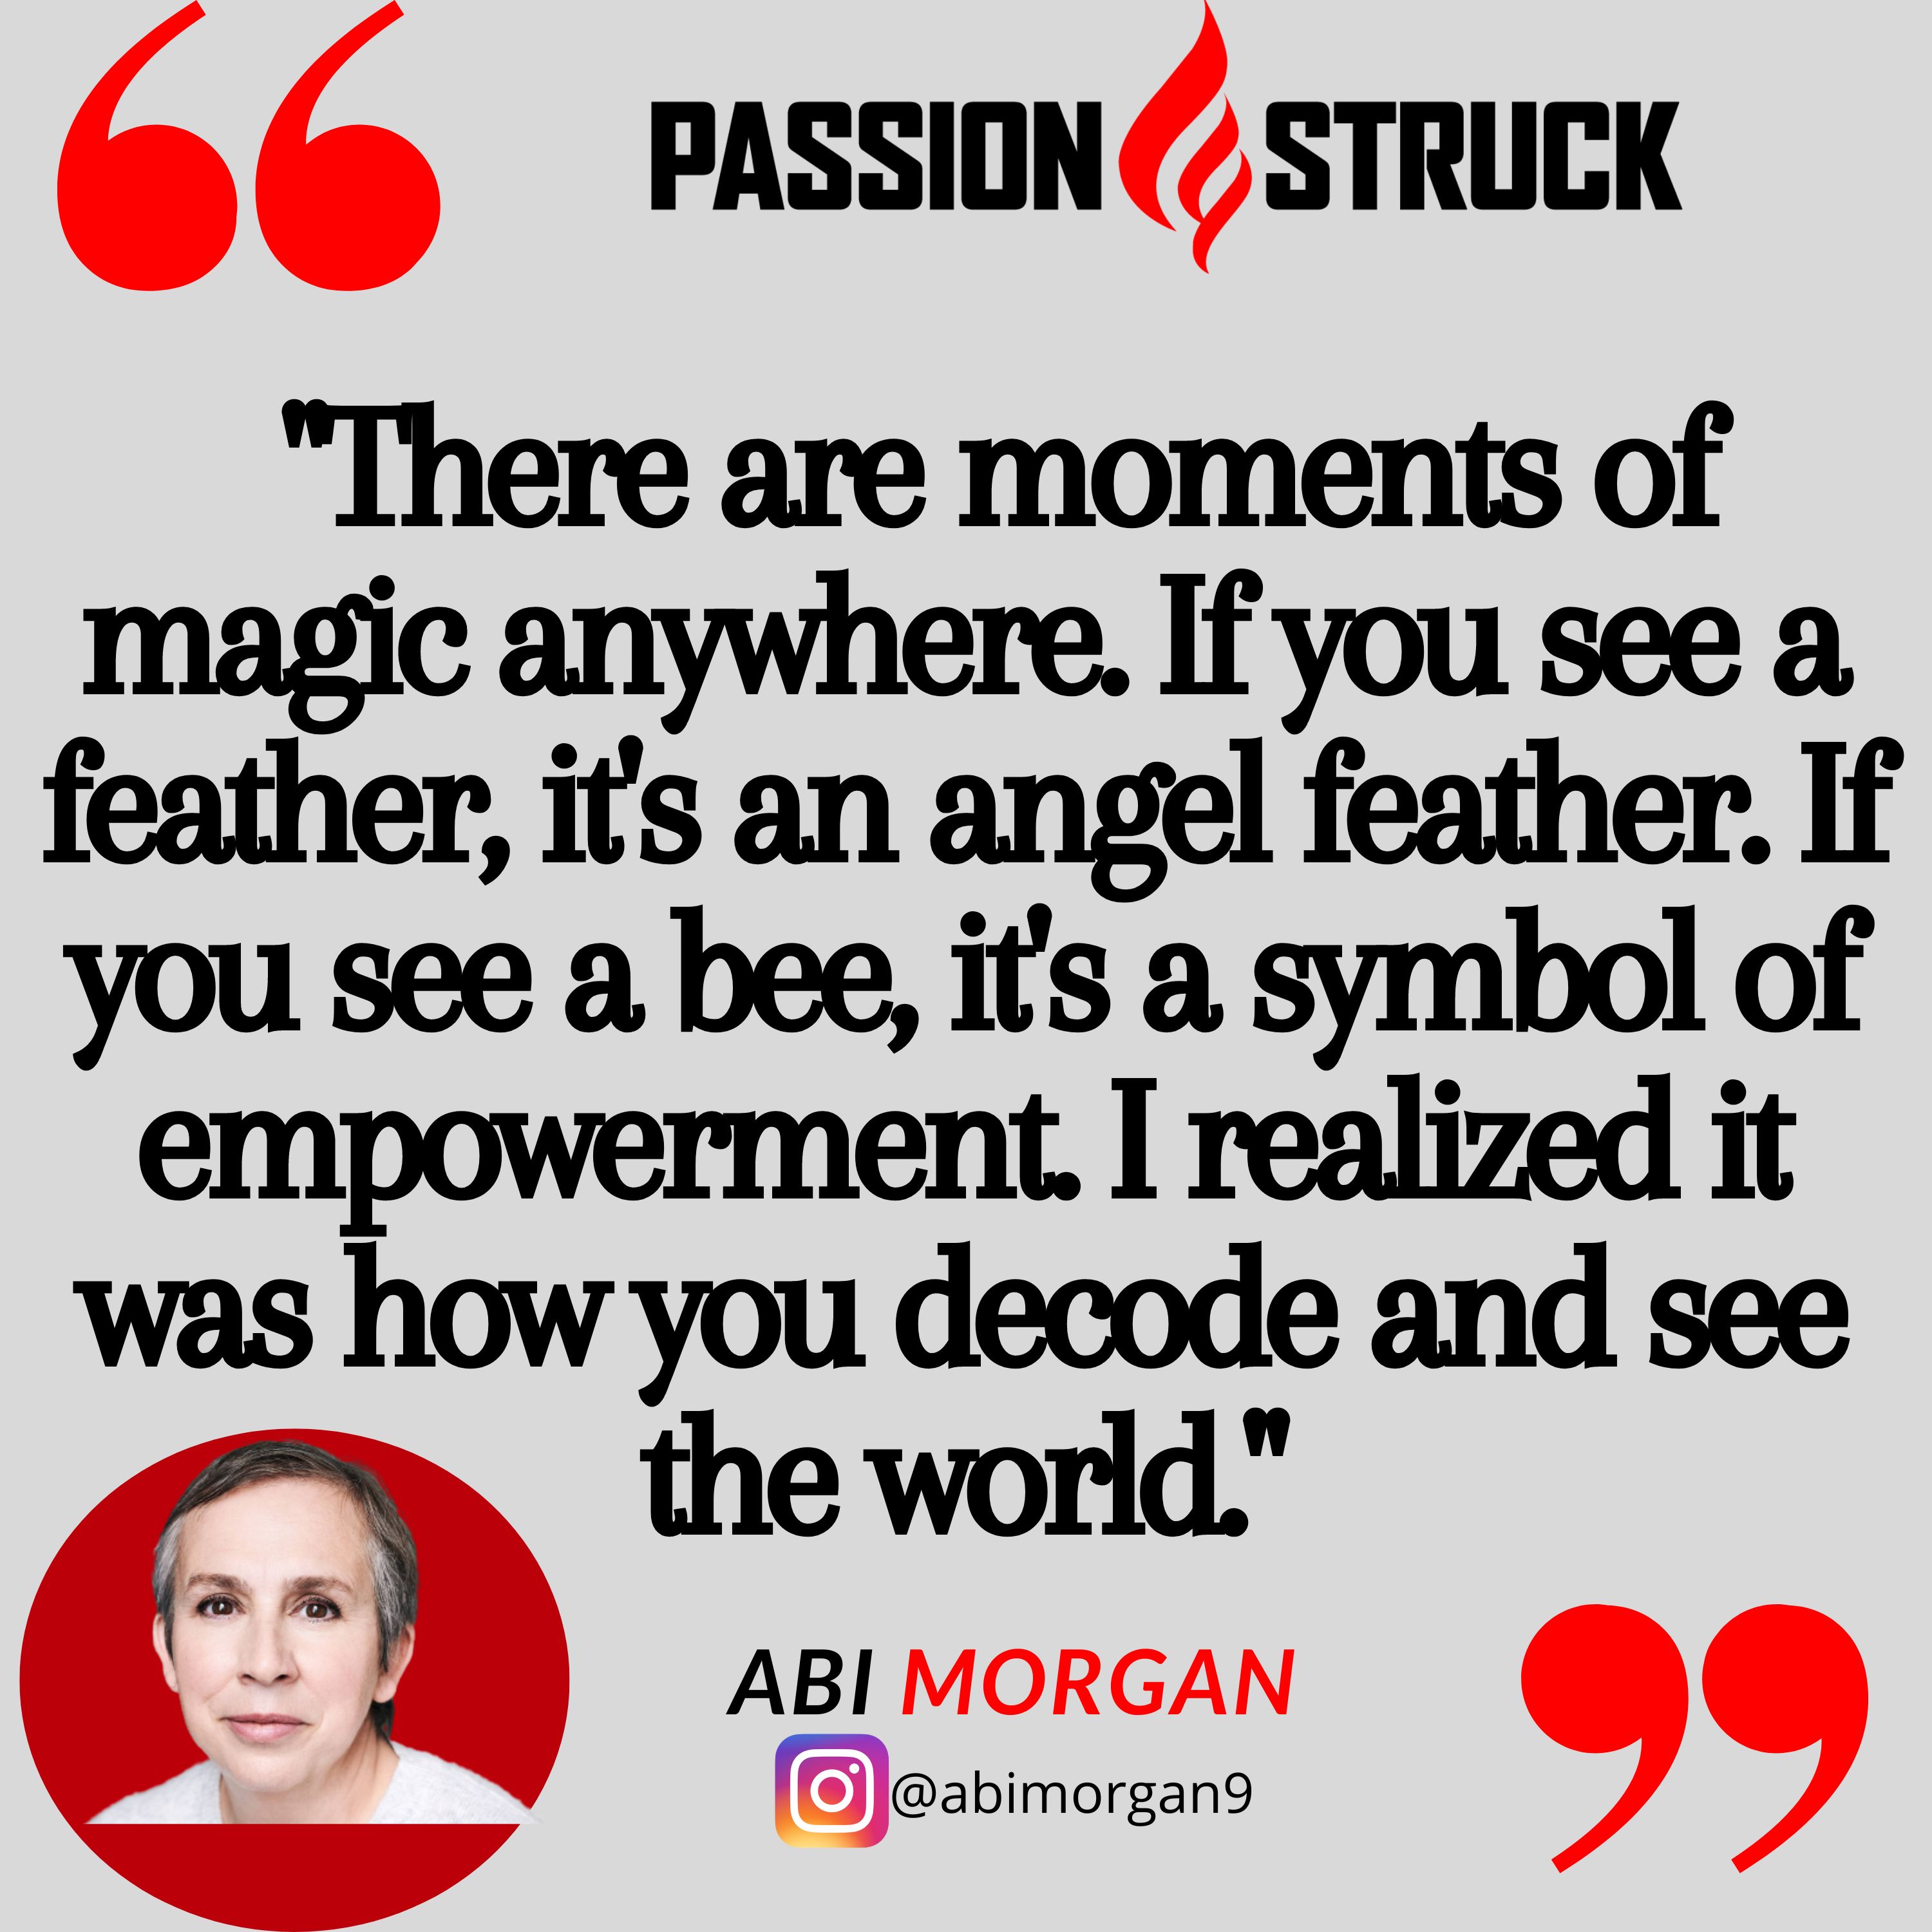 Screenwriter Abi Morgan Quote from the Passion Struck Podcast: "There are moments of magic anywhere. If you see a feather, it's an angel feather. If you see a bee, it's a symbol of empowerment. I realized it was how you decode and see the world."